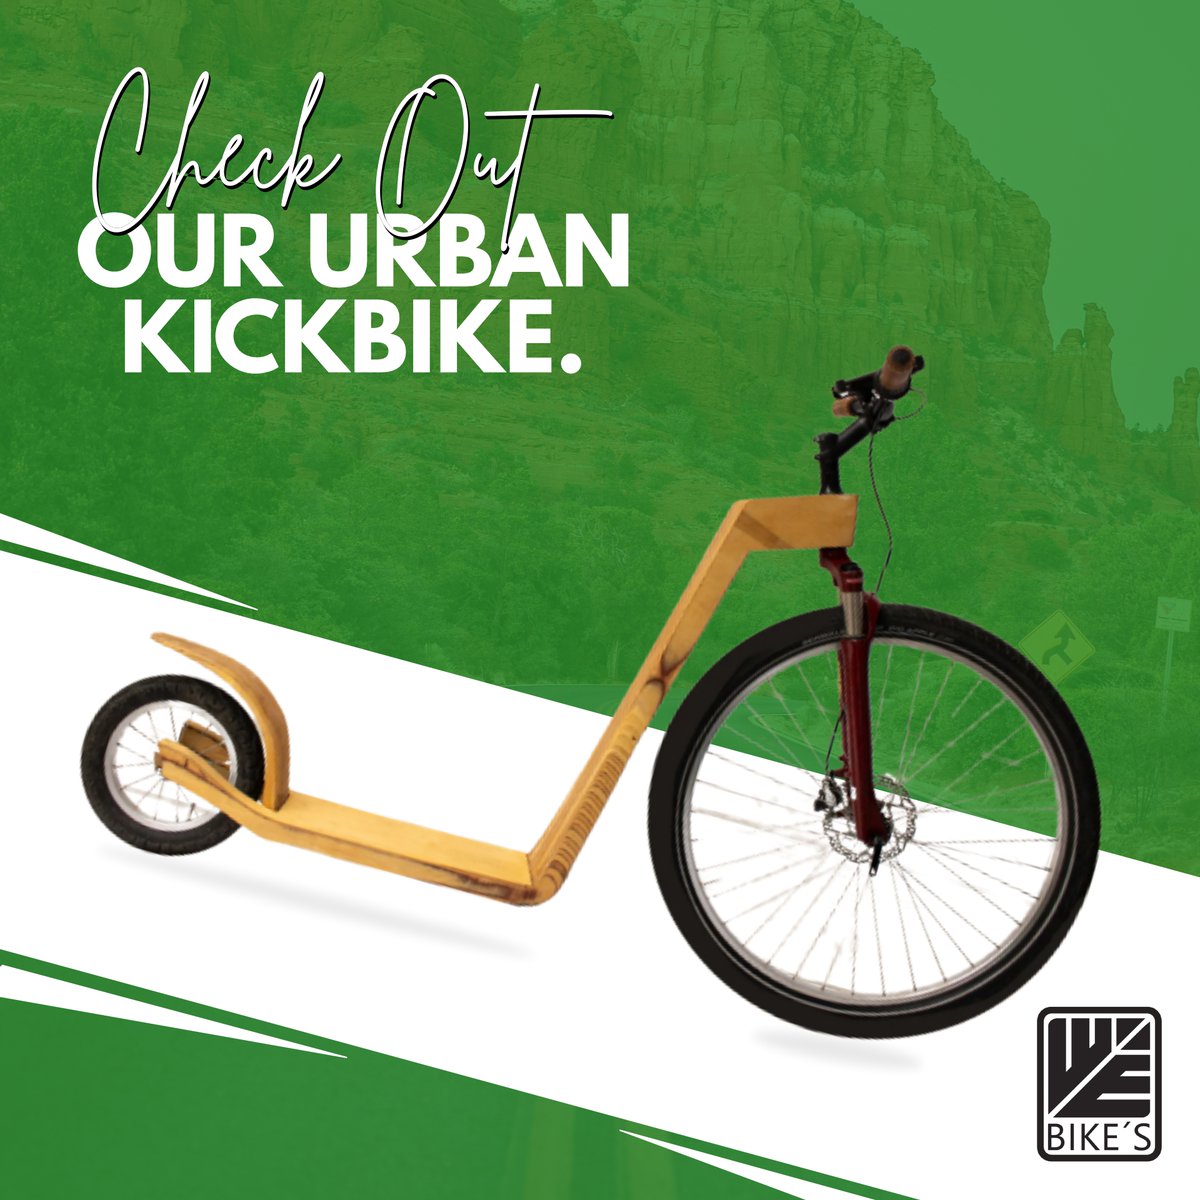 The City Kickbike is our versatile runabout that was specially designed for use in urban areas. This way you can make your way around the city in a nature-friendly way with a lot of driving fun.
----
🌐 wooden-kickbike.de
.
#woodenkickbikes #wooden #unique #handmade #webikes